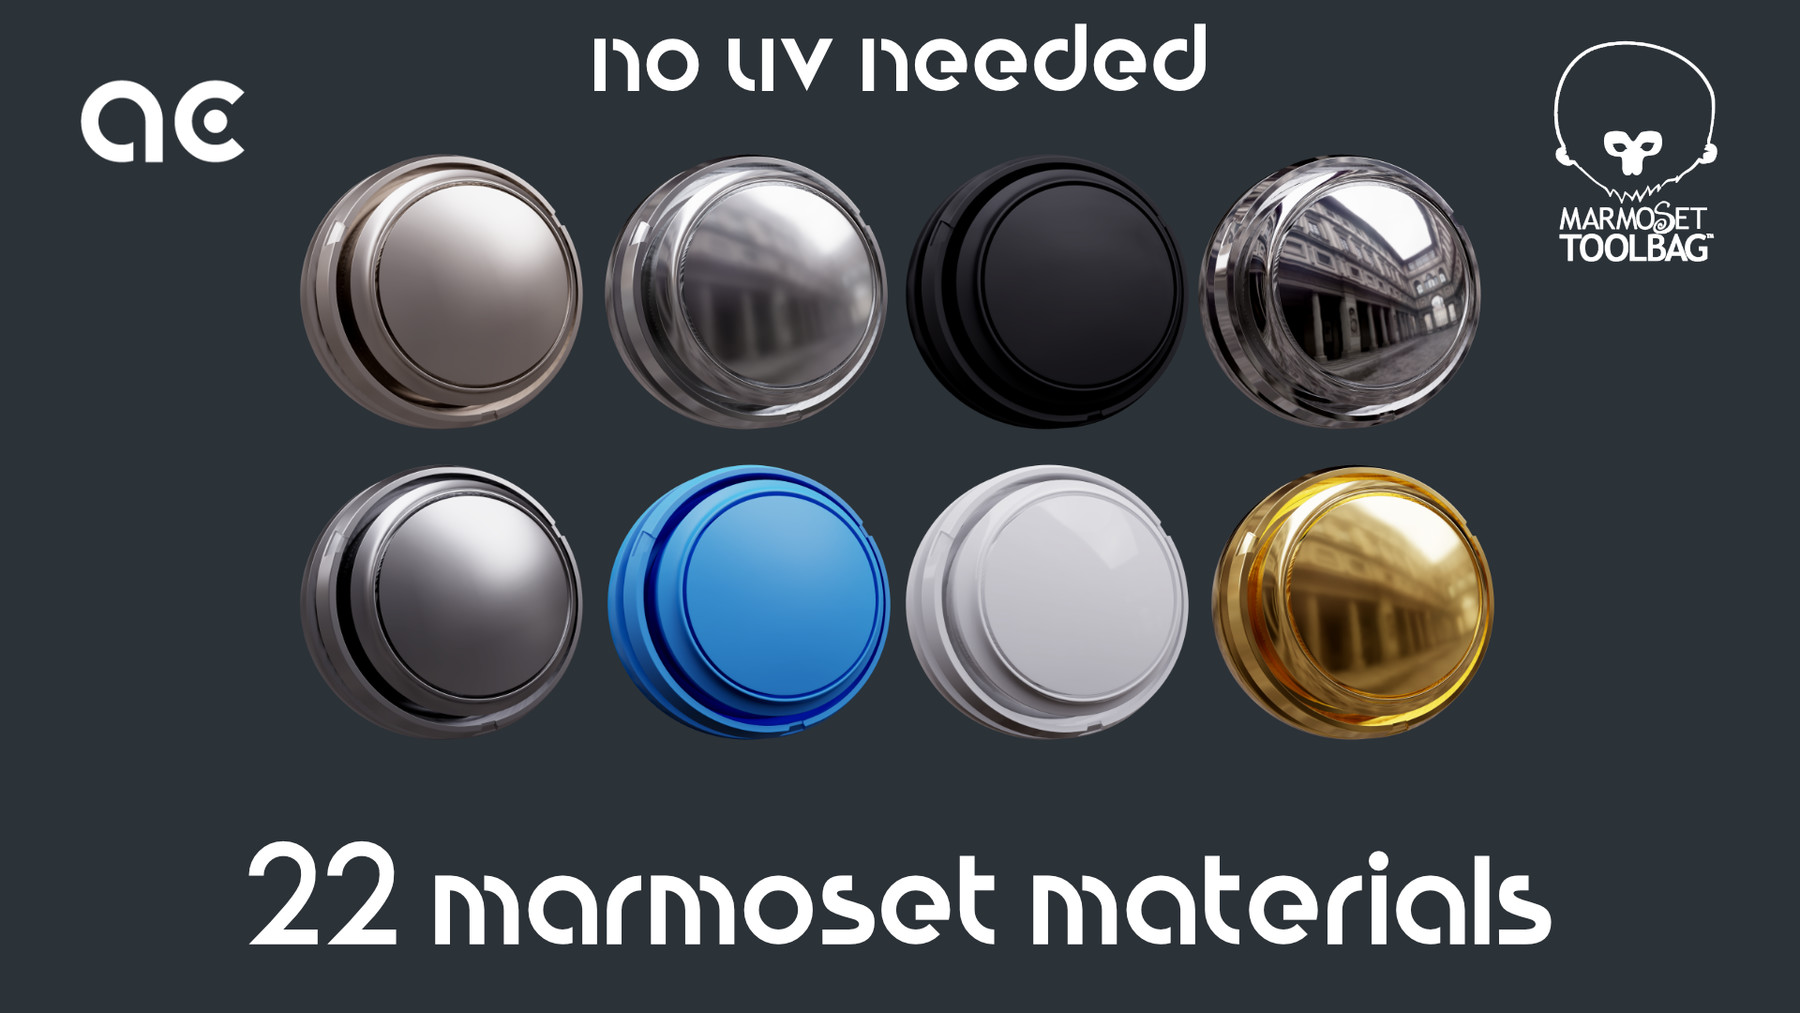 marmoset toolbag collection of materials